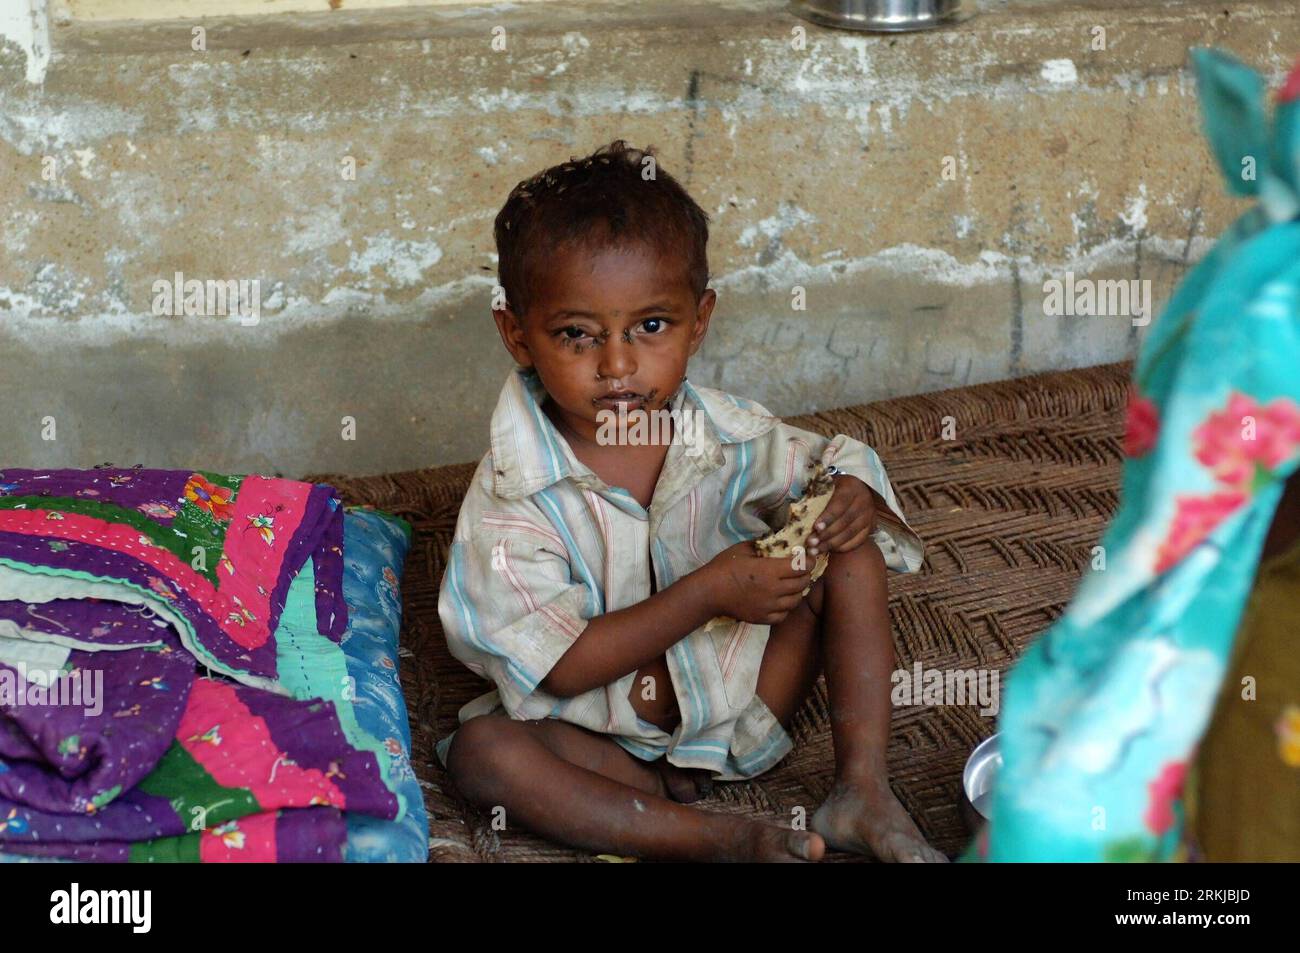 Bildnummer: 56086788  Datum: 23.09.2011  Copyright: imago/Xinhua (110923) -- SINDH, Sept. 23, 2011 (Xinhua) -- A Pakistani boy eats food at a makeshift tent in the flood-hit Sanghar district of Pakistan s Sindh province, Sept. 23, 2011. Two million Pakistanis have fallen ill since monsoon rains left the southern region under several feet of water, the country s disaster authority said. More than 350 have been killed and over eight million have been affected this year by floods. (Xinhua/Ahmad Kamal) PAKISTAN-SINDH-FLOOD PUBLICATIONxNOTxINxCHN Gesellschaft Naturkatastrophe Hochwasser Opfer xda x Stock Photo